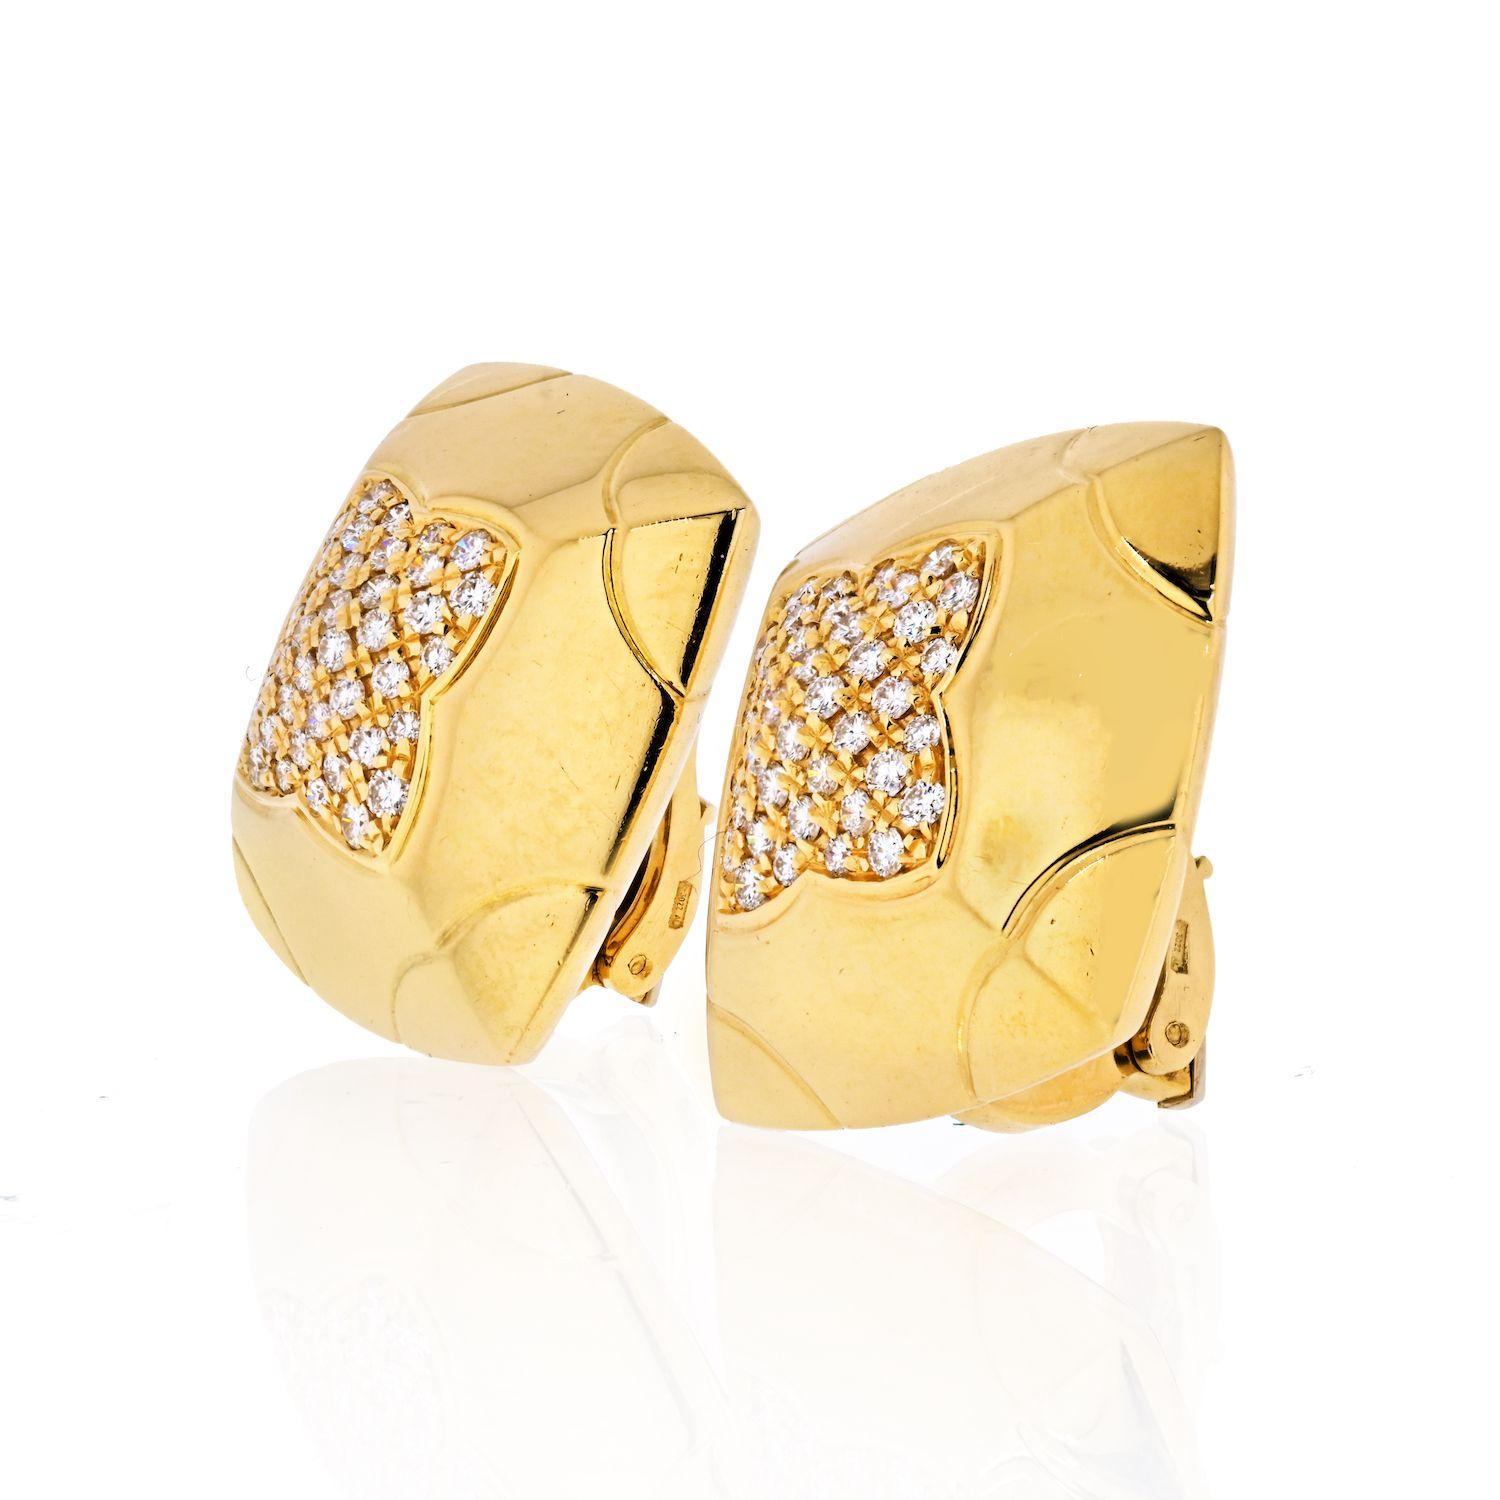 Gorgeous Bulgari pyramid ear clip earrings in 18k yellow gold with diamonds.
Composed of 80 round brilliant cut diamonds set on the tip of pyramid
Total carat weight is approximately 1.52 ct. 1 inch wide. 
Color: E-F
Clarity: VS